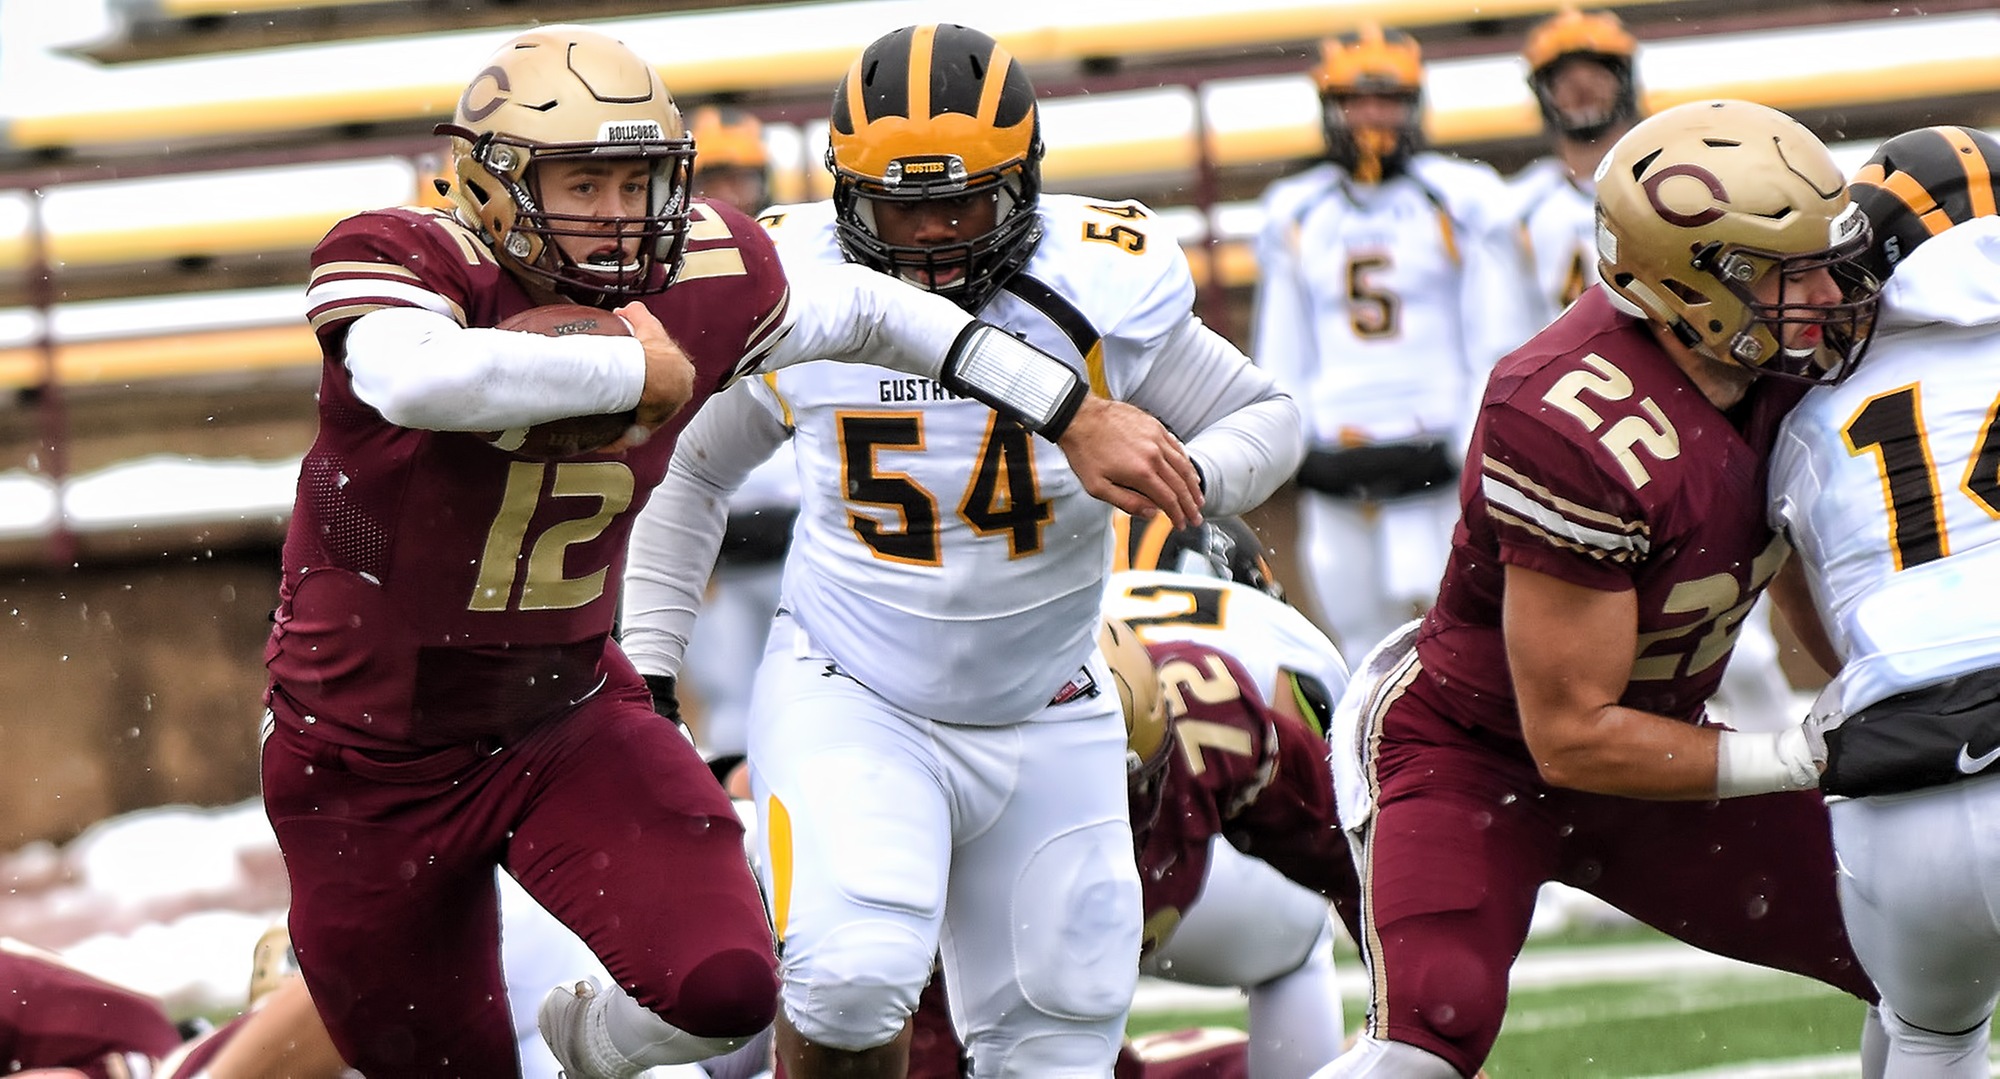 Senior quarterback Blake Kragnes runs through the defensive line of Gustavus during the Cobbers' Homecoming game. Kragnes scored all four of CC's touchdowns.